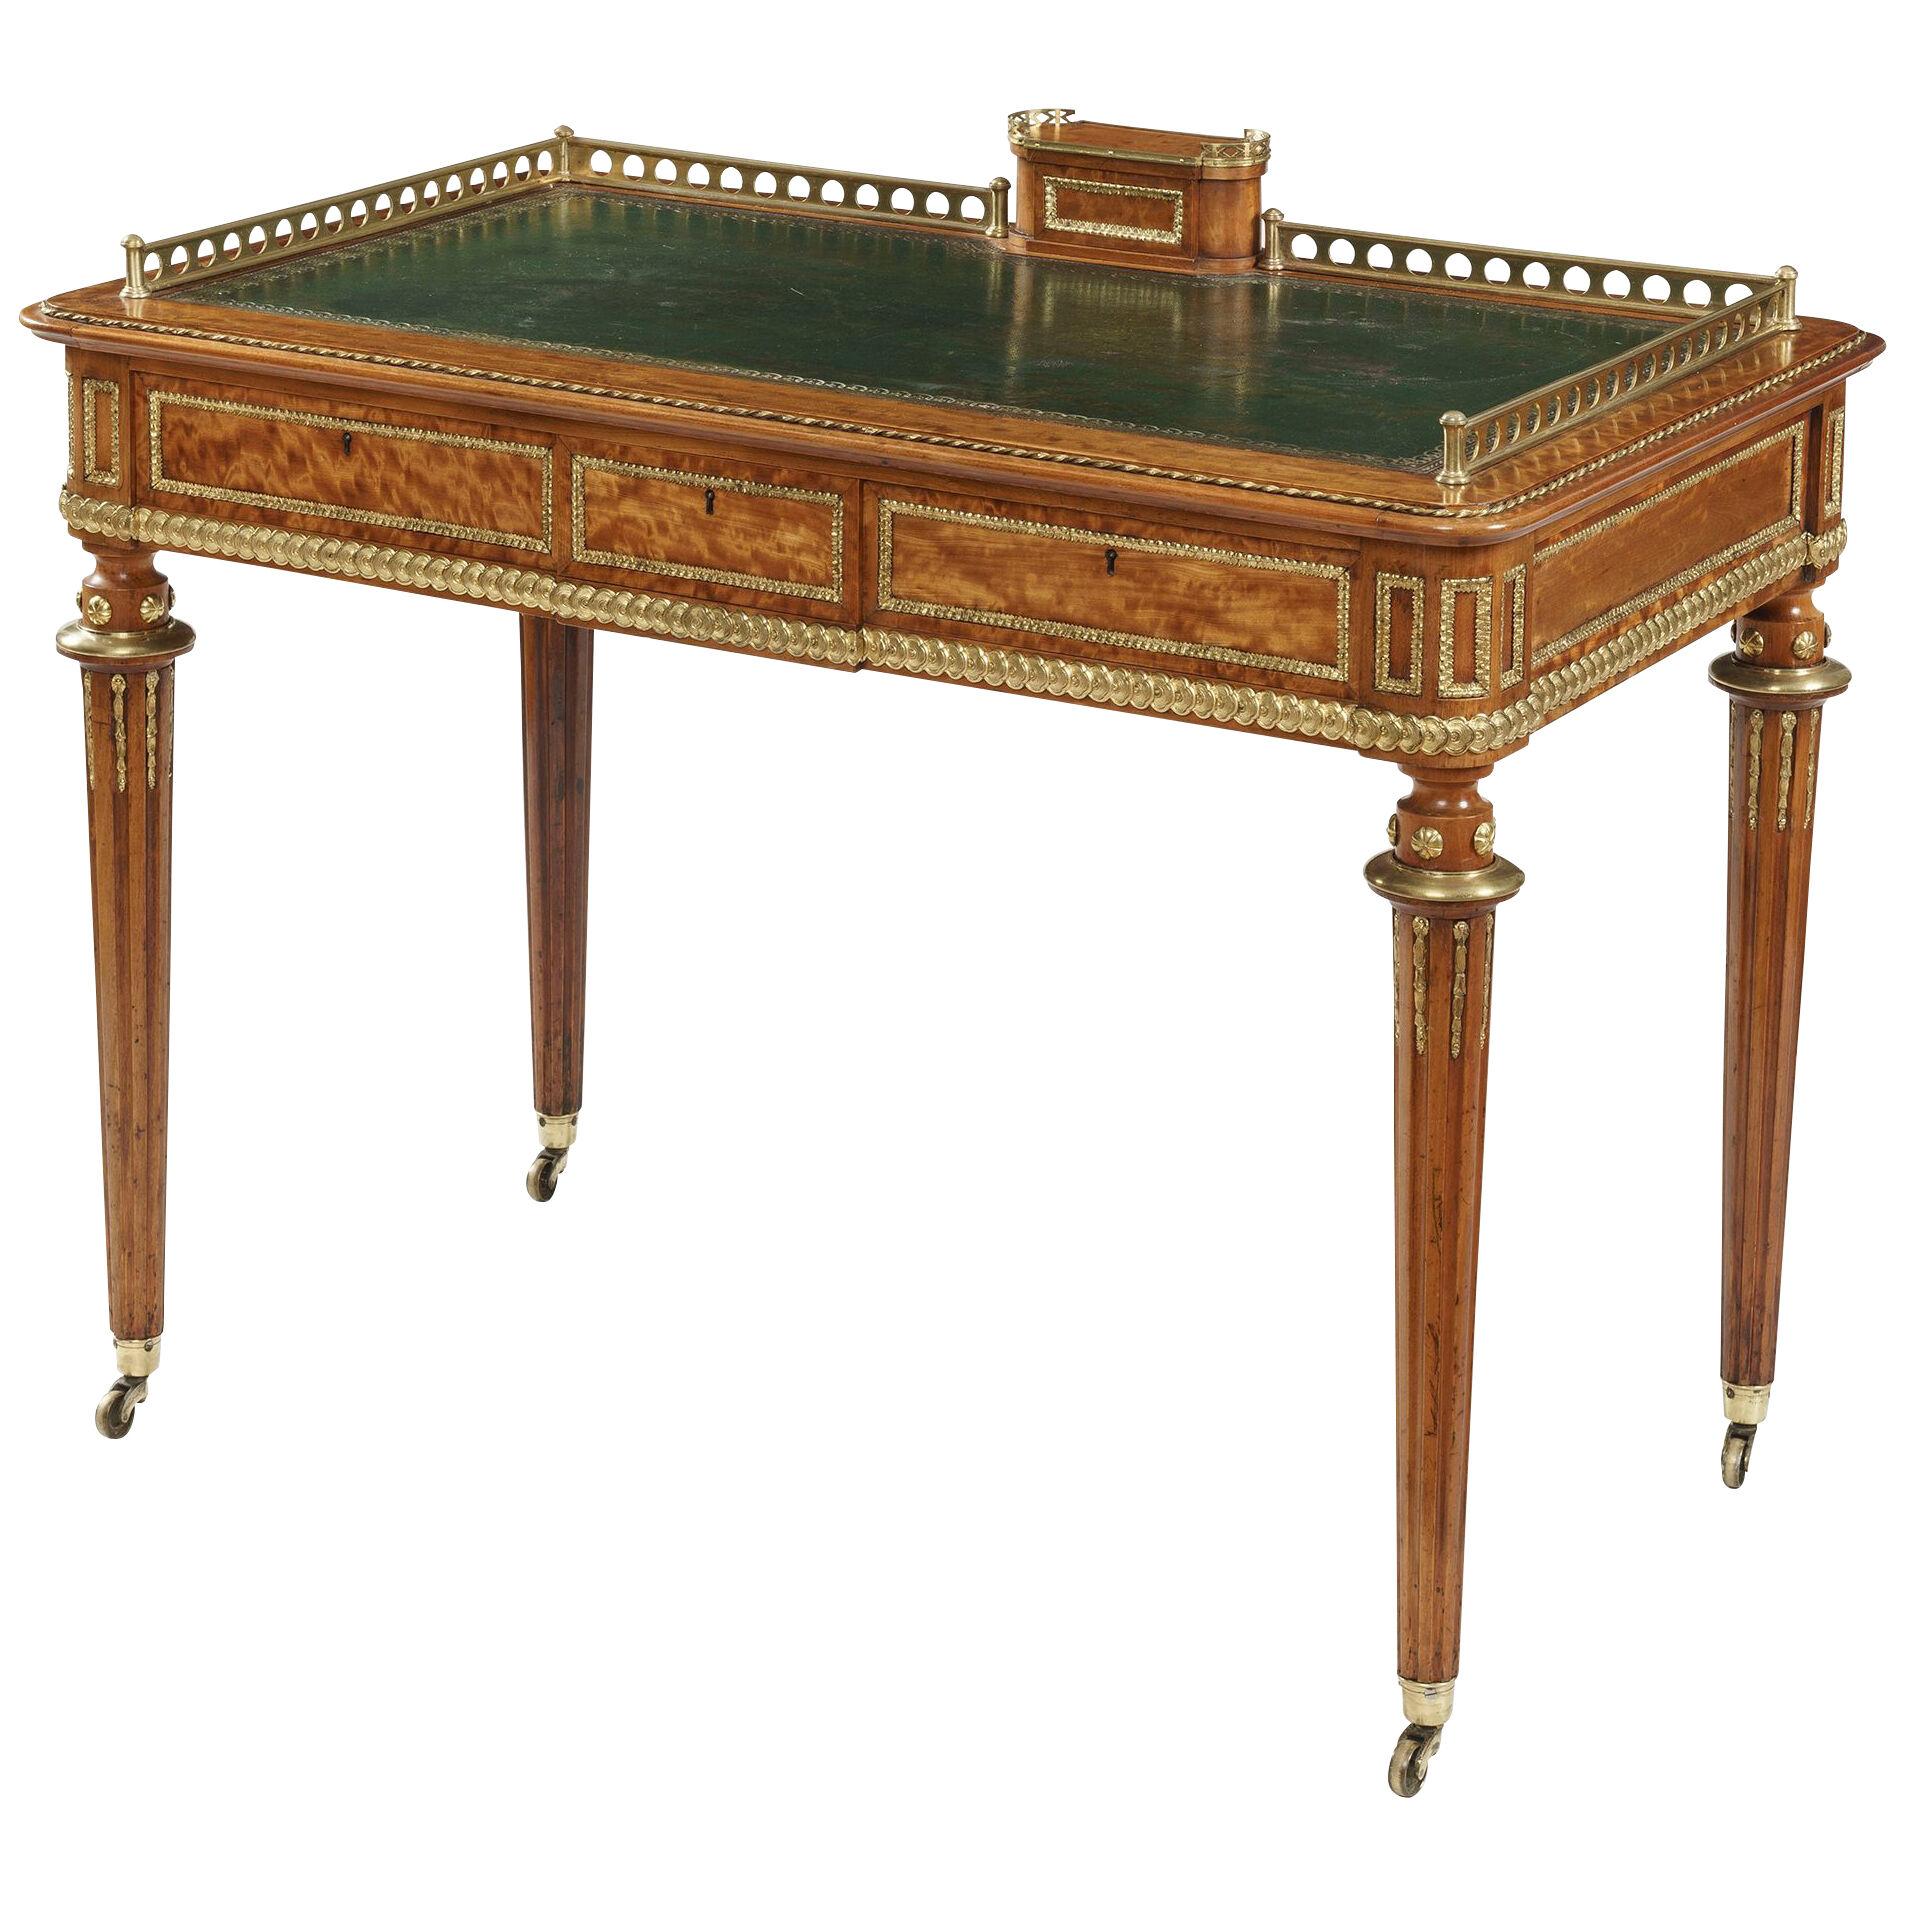  19th Century Satinwood Writing Desk Attributed to Holland & Sons